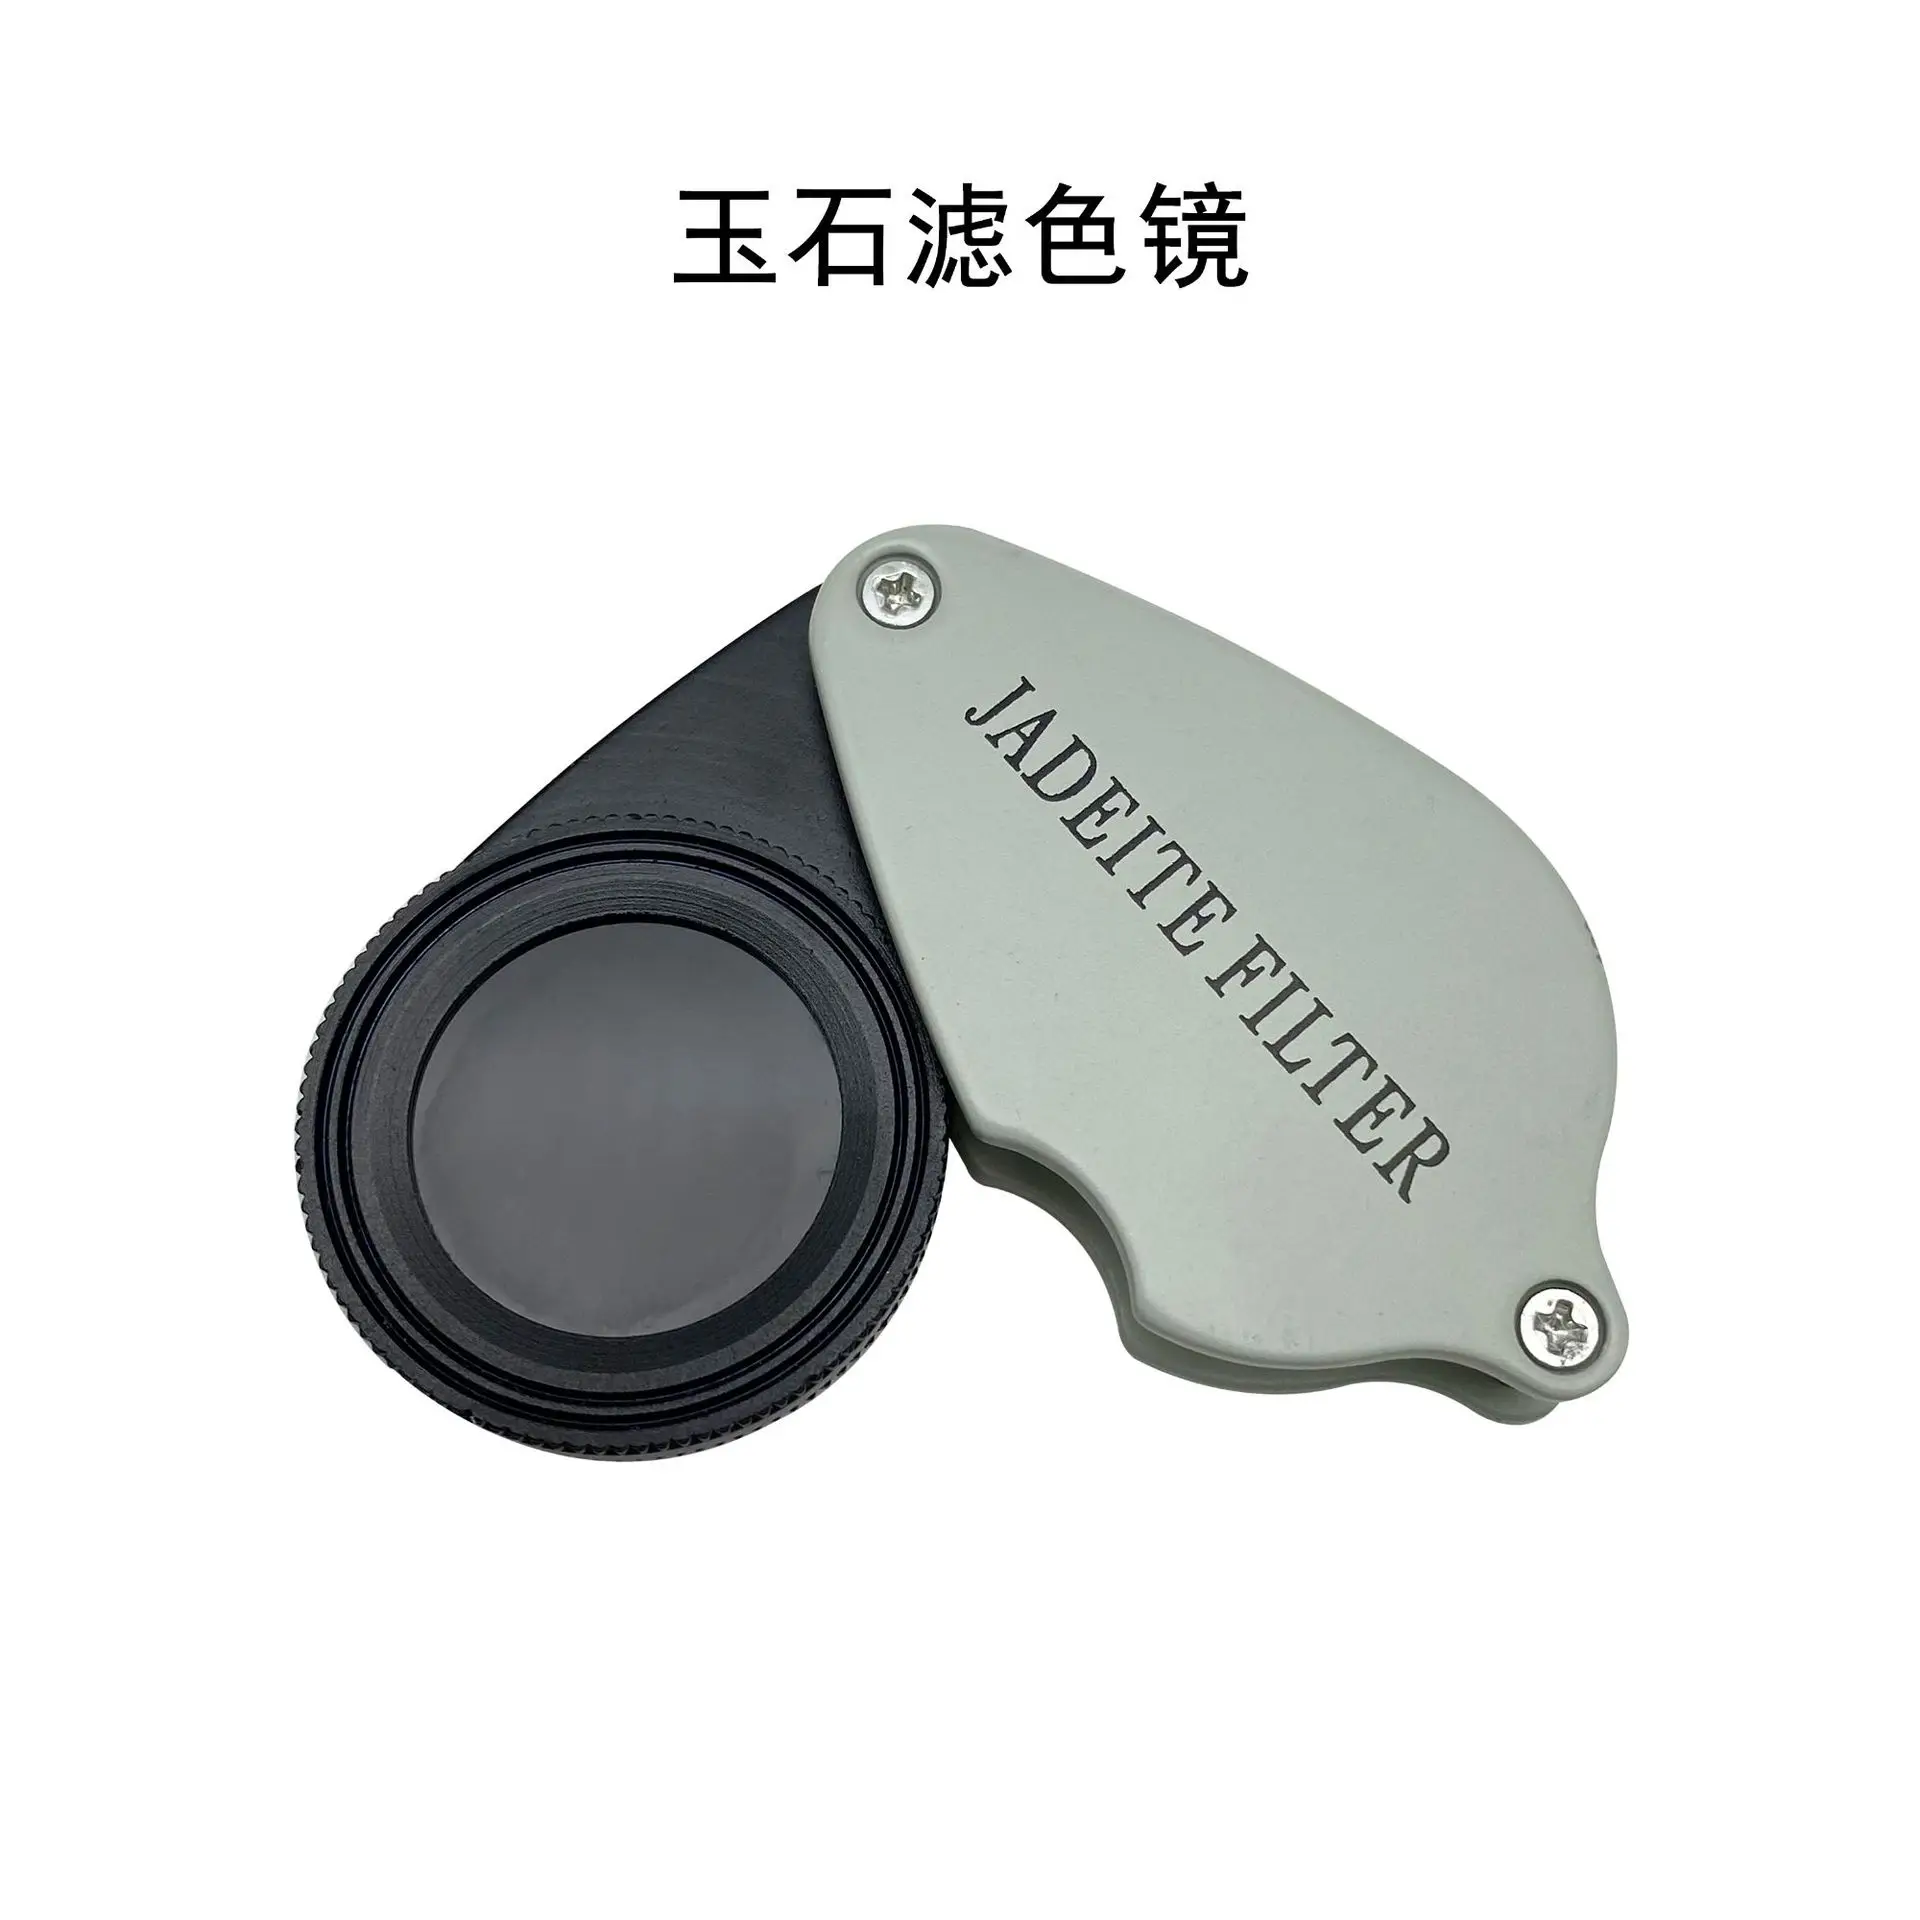 35X Foldable Jewelry Magnifier Chelsea Jade Color Filter Double Lens Portable Magnifier for Gem Identification Printing Industry